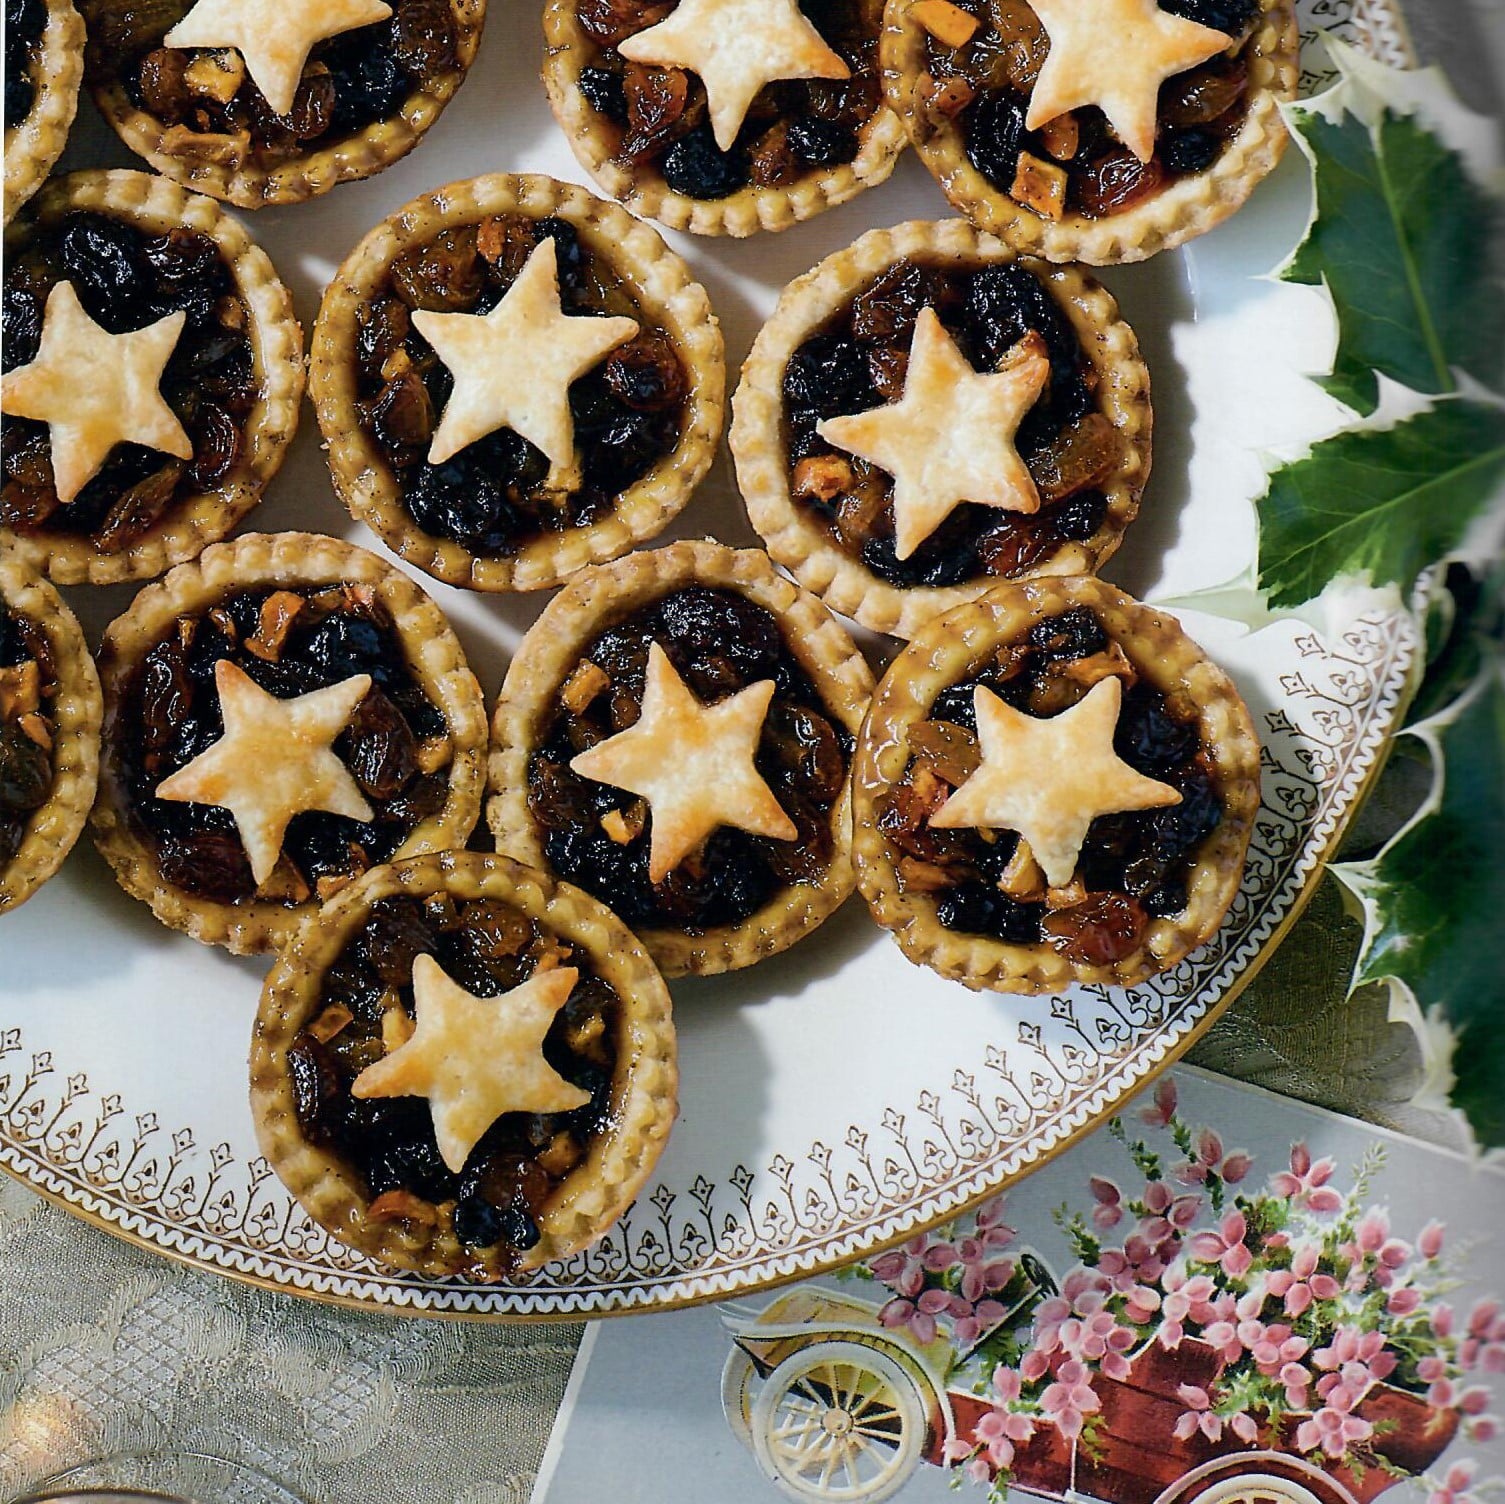 October 26 is Mincemeat Day